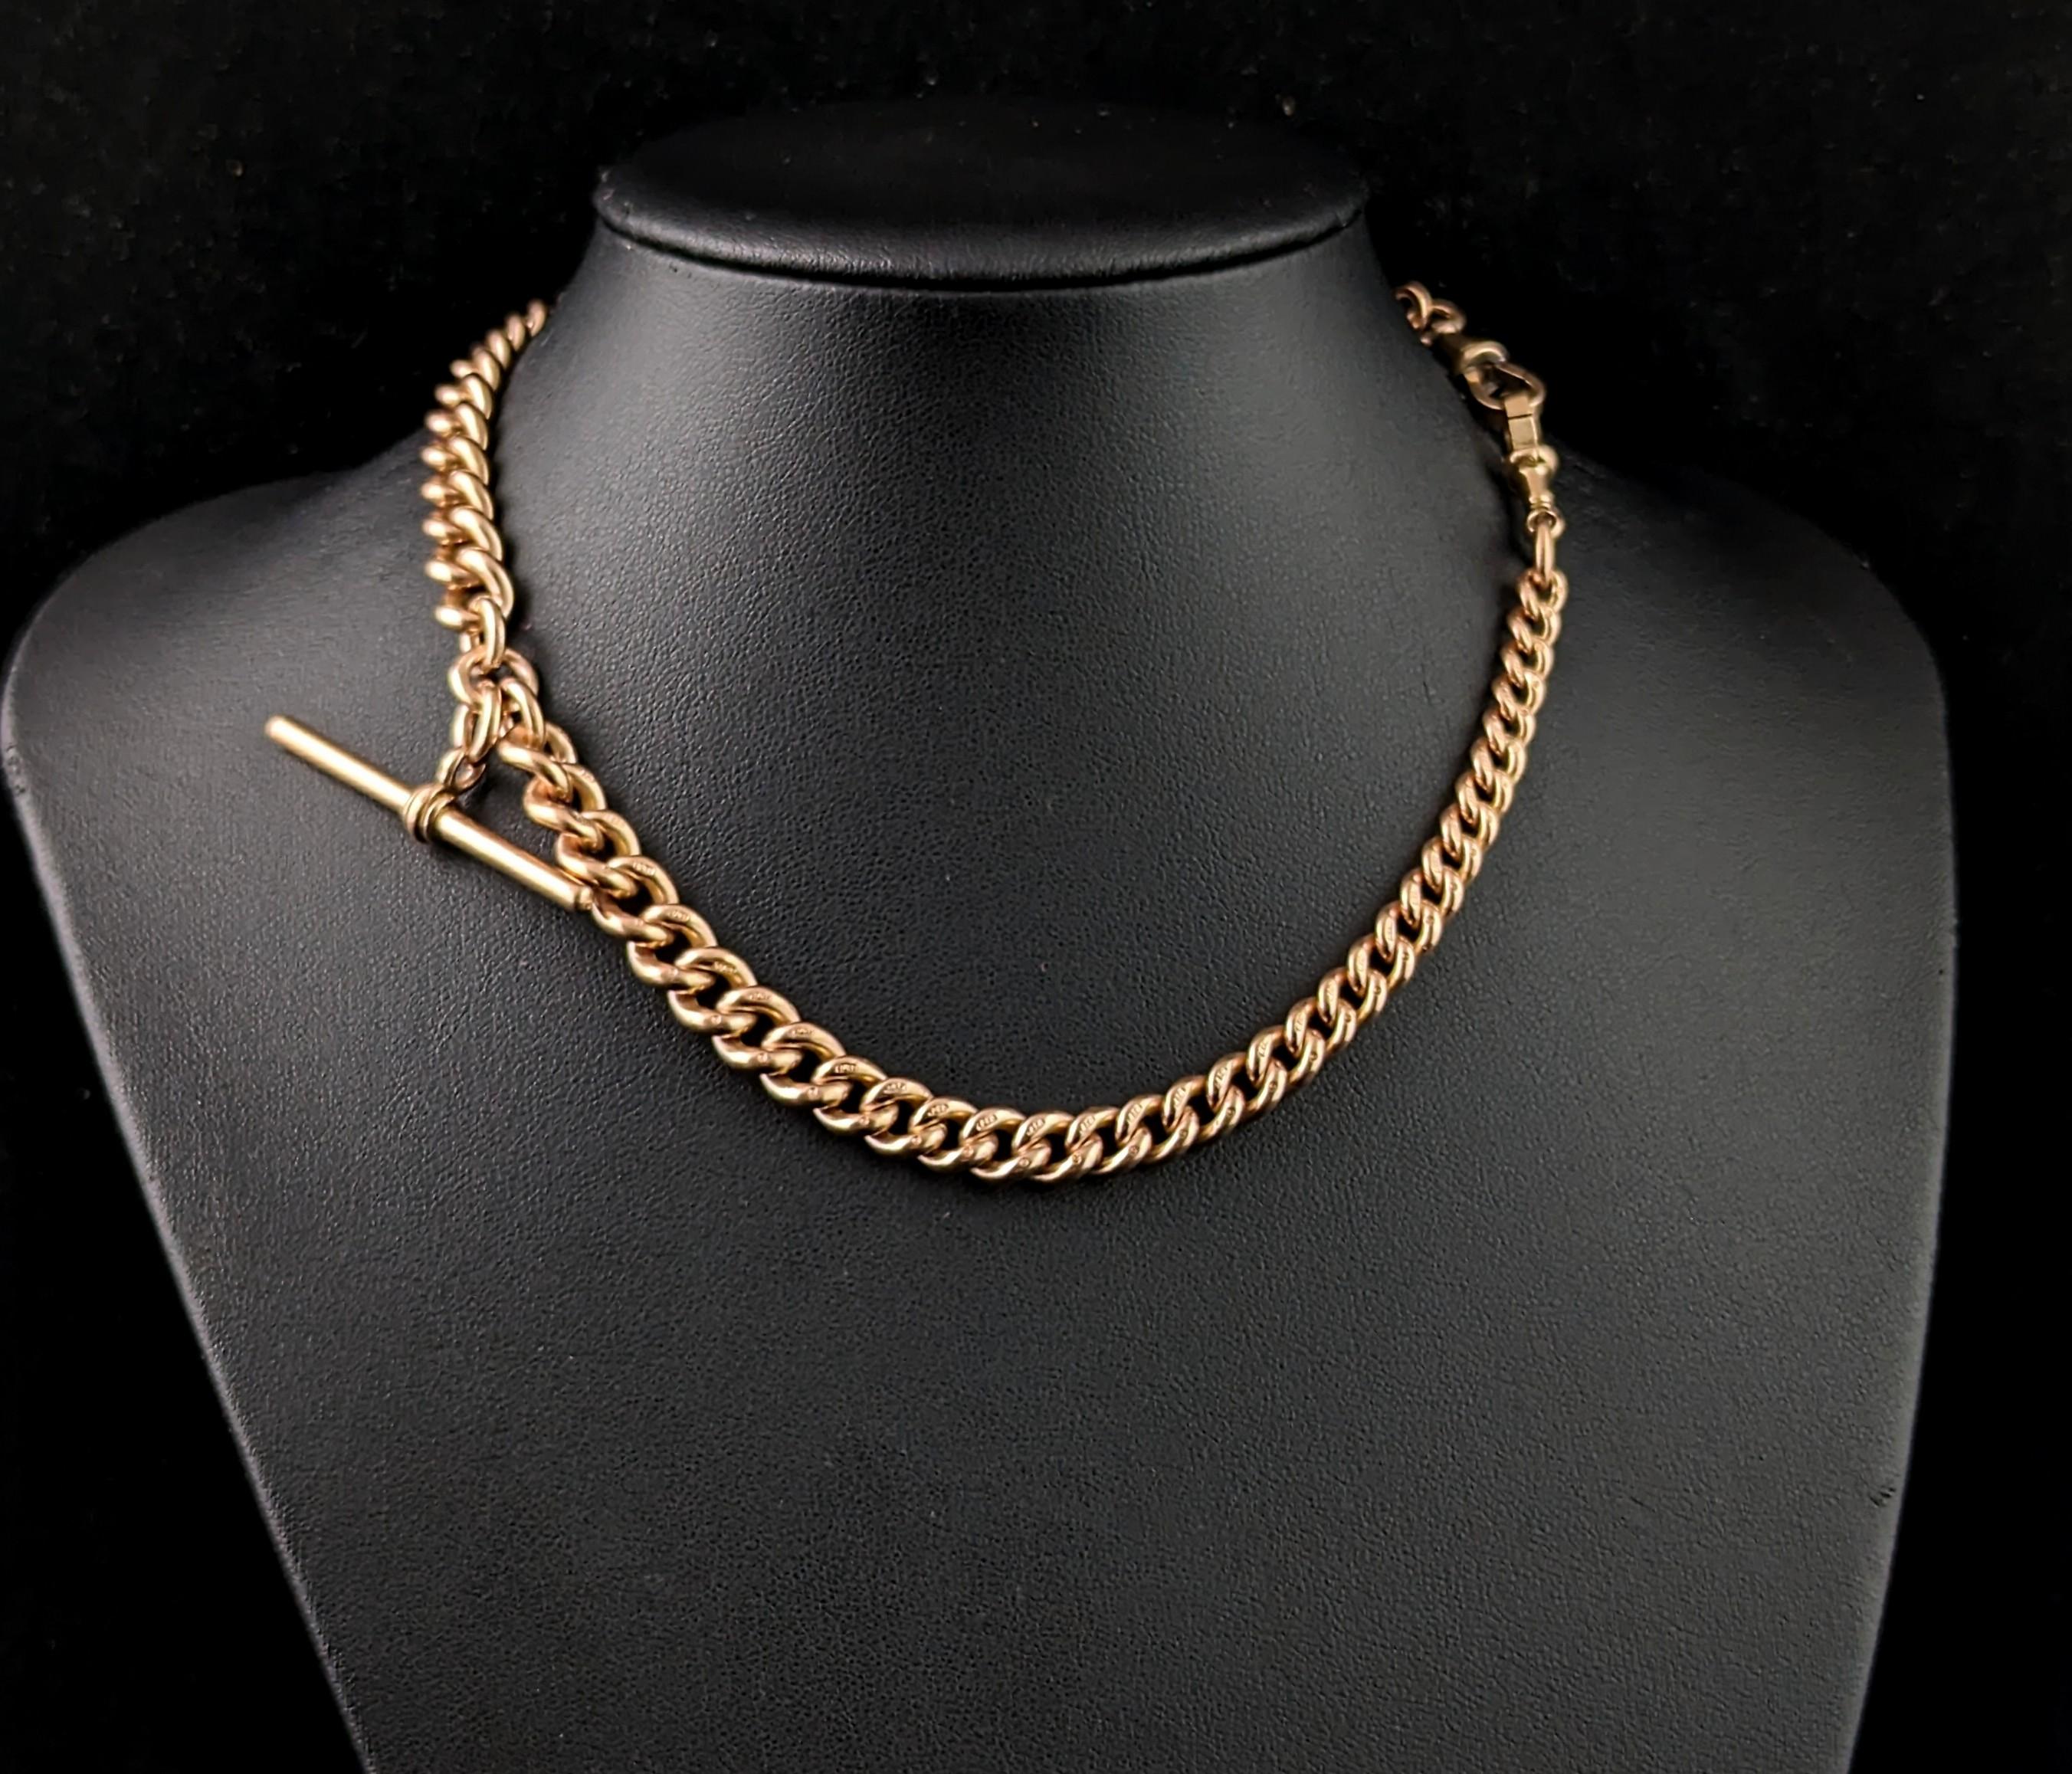 You are sure to be charmed by this handsome antique Edwardian era 9ct gold Albert chain.

It is a curb link chain in rich antique 9ct gold with both rosey and yellow gold tones, each link individually stamped for 9ct gold, 9.375.

A double Albert